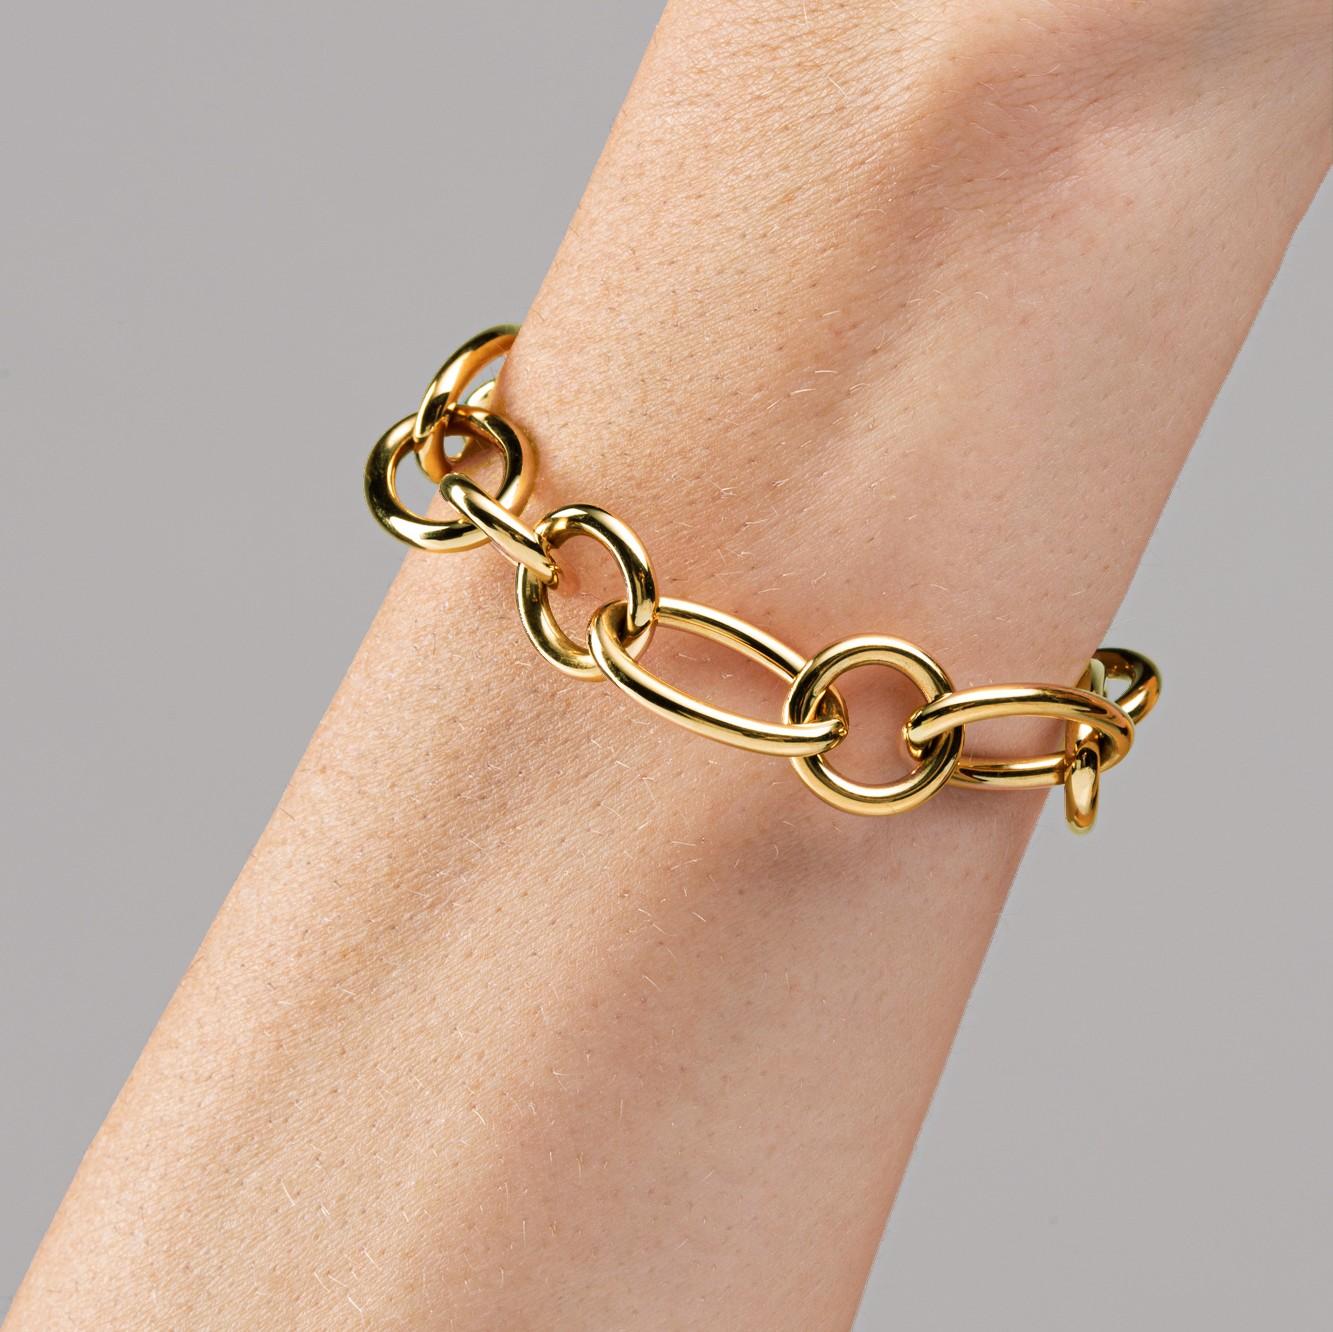 Alex Jona design collection, hand crafted in Italy, 18 karat yellow gold, 7.5 in.-19cm. long, chain bracelet.

Alex Jona jewels stand out, not only for their special design and for the excellent quality of the gemstones, but also for the careful